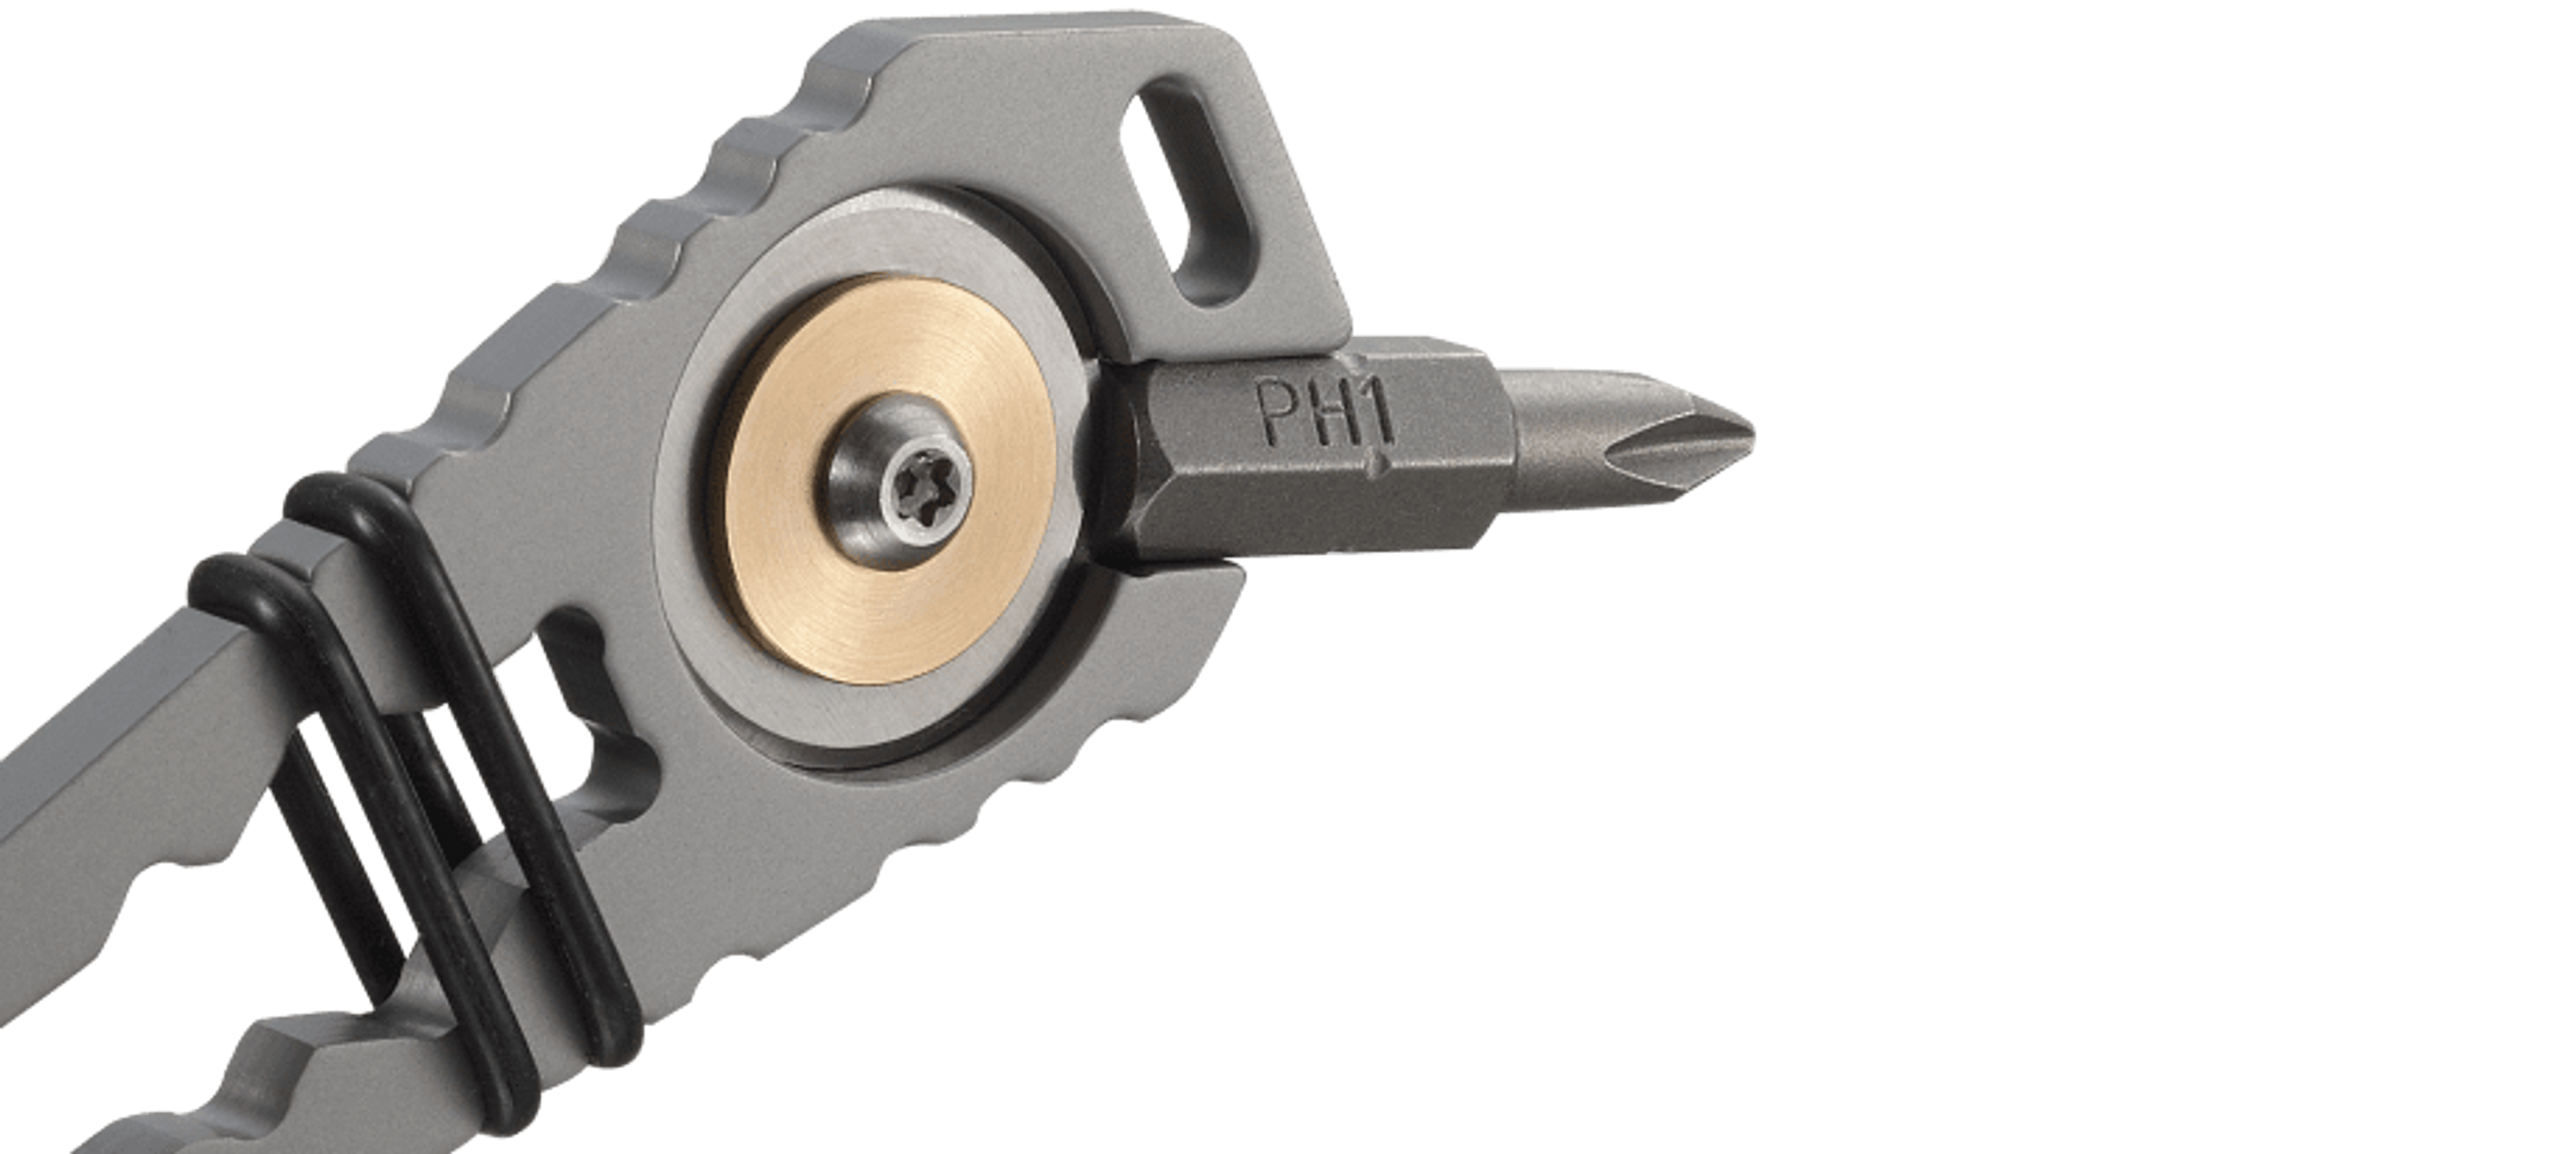 Pry Cutter Keychain Tool angled feature highlight